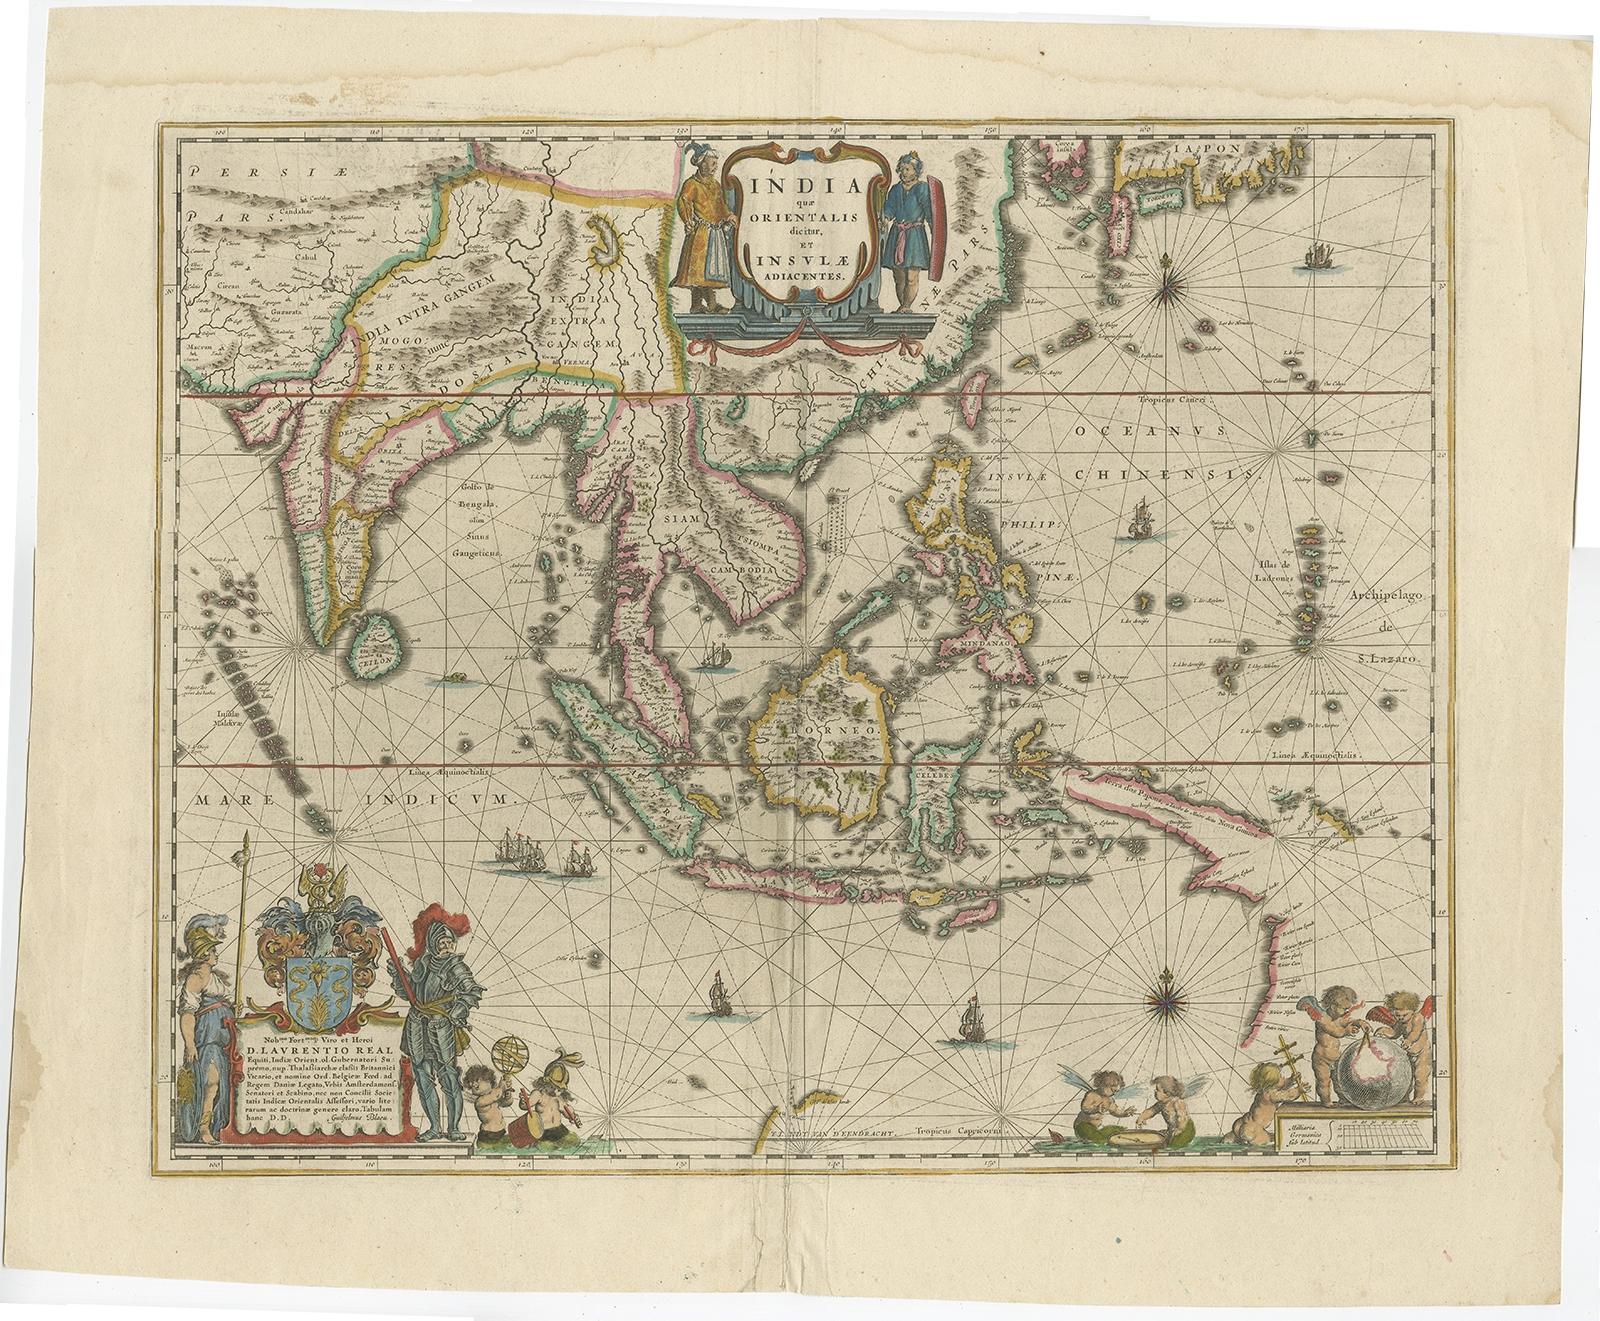 Antique map titled 'India quae Orientalis dicitur et Insulae Adiacentes'. 

Beautiful map of Southeast Asia, extending from India to Tibet to Japan to New Guinea. It was the first popular map to depict part of Australia. Includes a dedicational